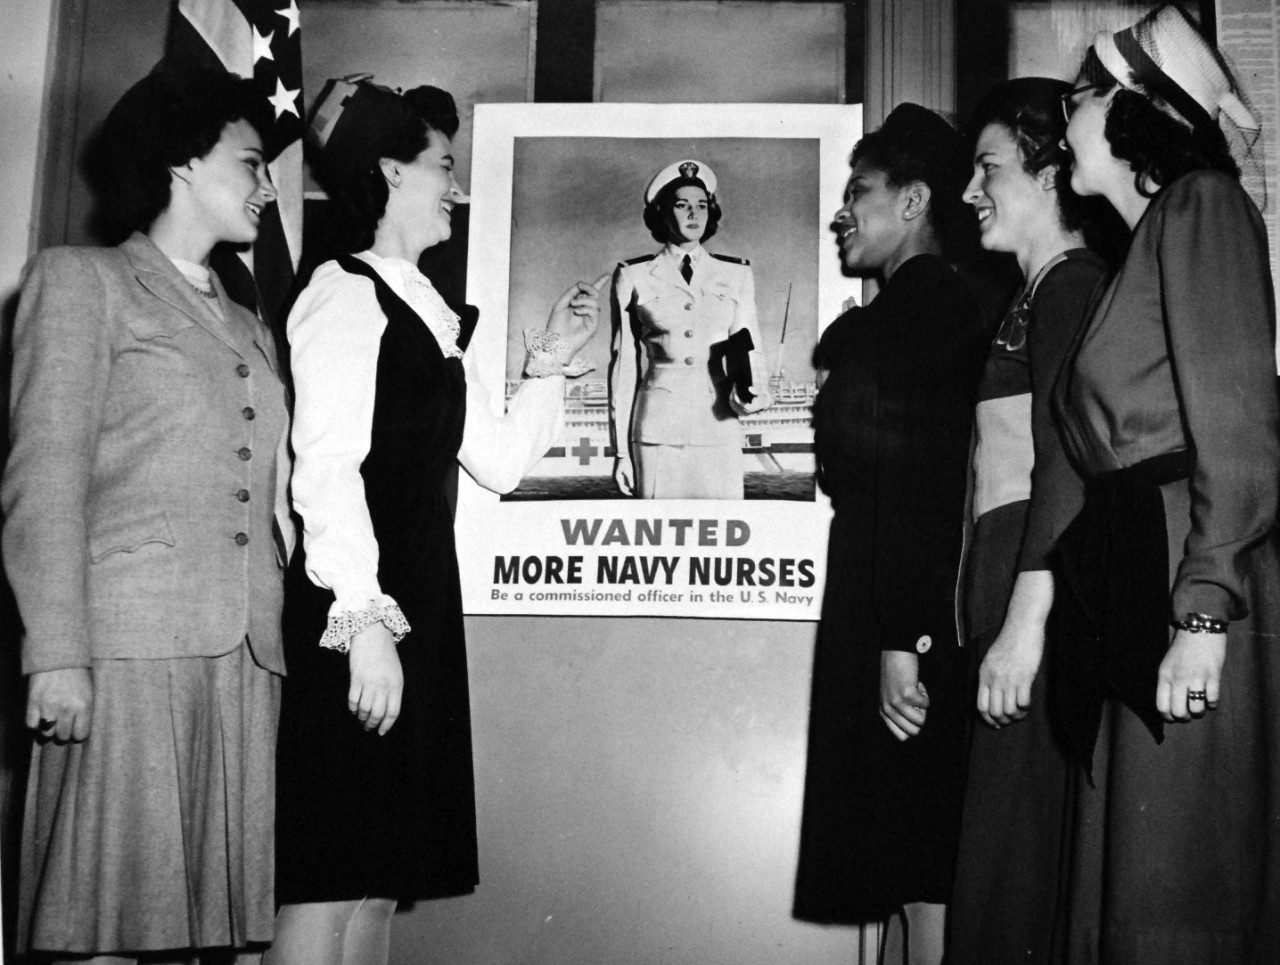 208-NP-8ZZ-2:   New Ensigns, March 1945.   These new Ensigns, the first commissioned in New York under the Navy’s new speed-up nurse recruiting system, were sworn in on March 8, 1945, at the Office of Naval Officer Procurement.  Included was the first African-American nurse commissioned by the U.S. Navy.  The five, left to right:   Marion Helen Bendix; Barbara Joan Zeigler; Phyllis Mae Daley; Adele Lee Bruce; and Jane Agnes Delanger.  In order to speed commissioning, the system was instituted a month ago to have registered nurses make applications through the New York office rather than direct inquiries to the Surgeon General’s office in Washington.   Official U.S. Navy photograph, now in the collections of the National Archives.